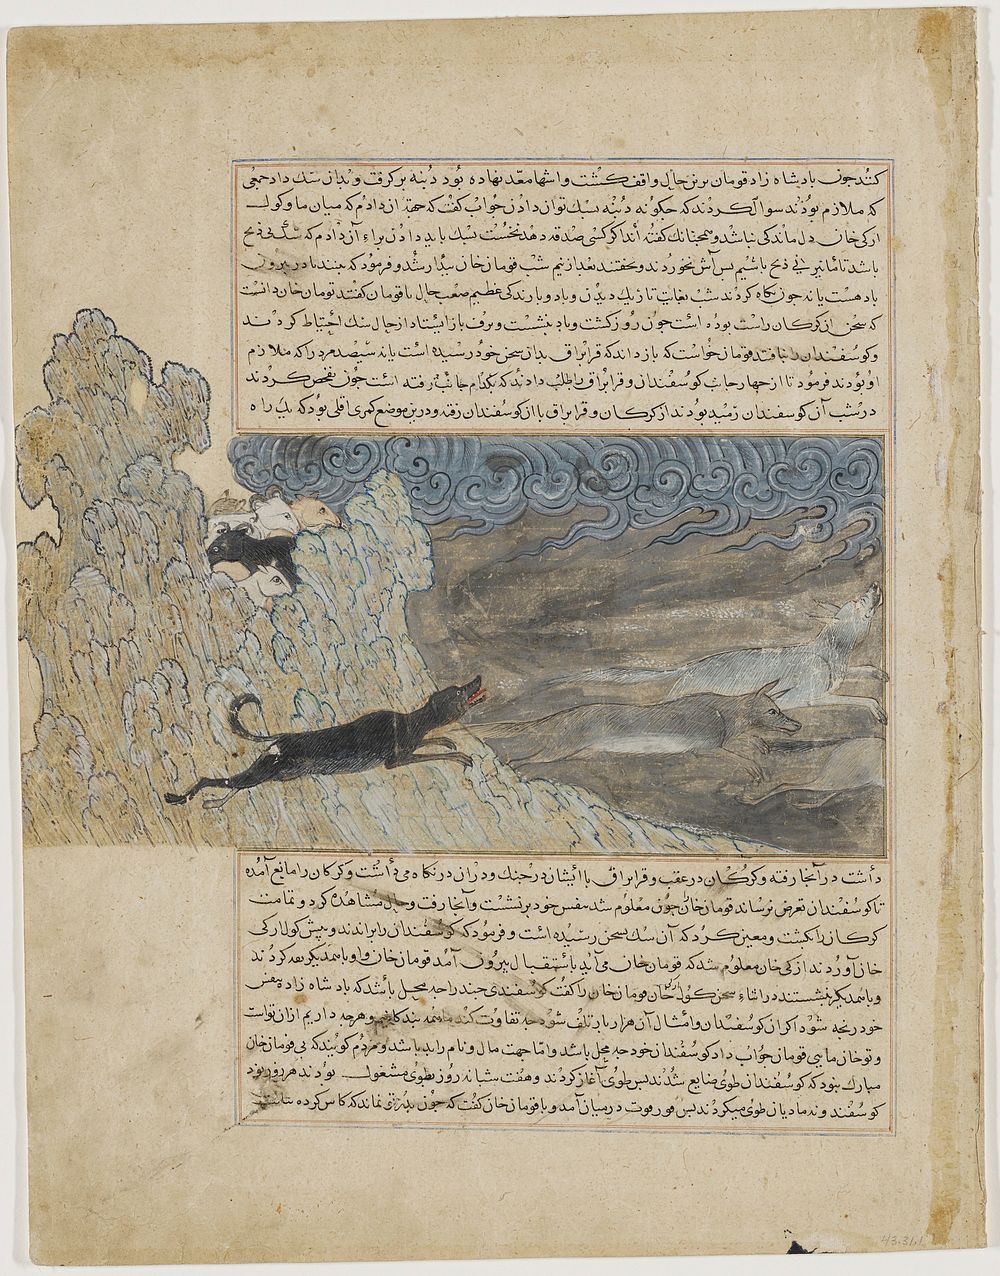 One of five pages owned by the MIA from the Majma al Tavarikh. This scene depicts 'The Dog Buraq (Black Lightning) driving…